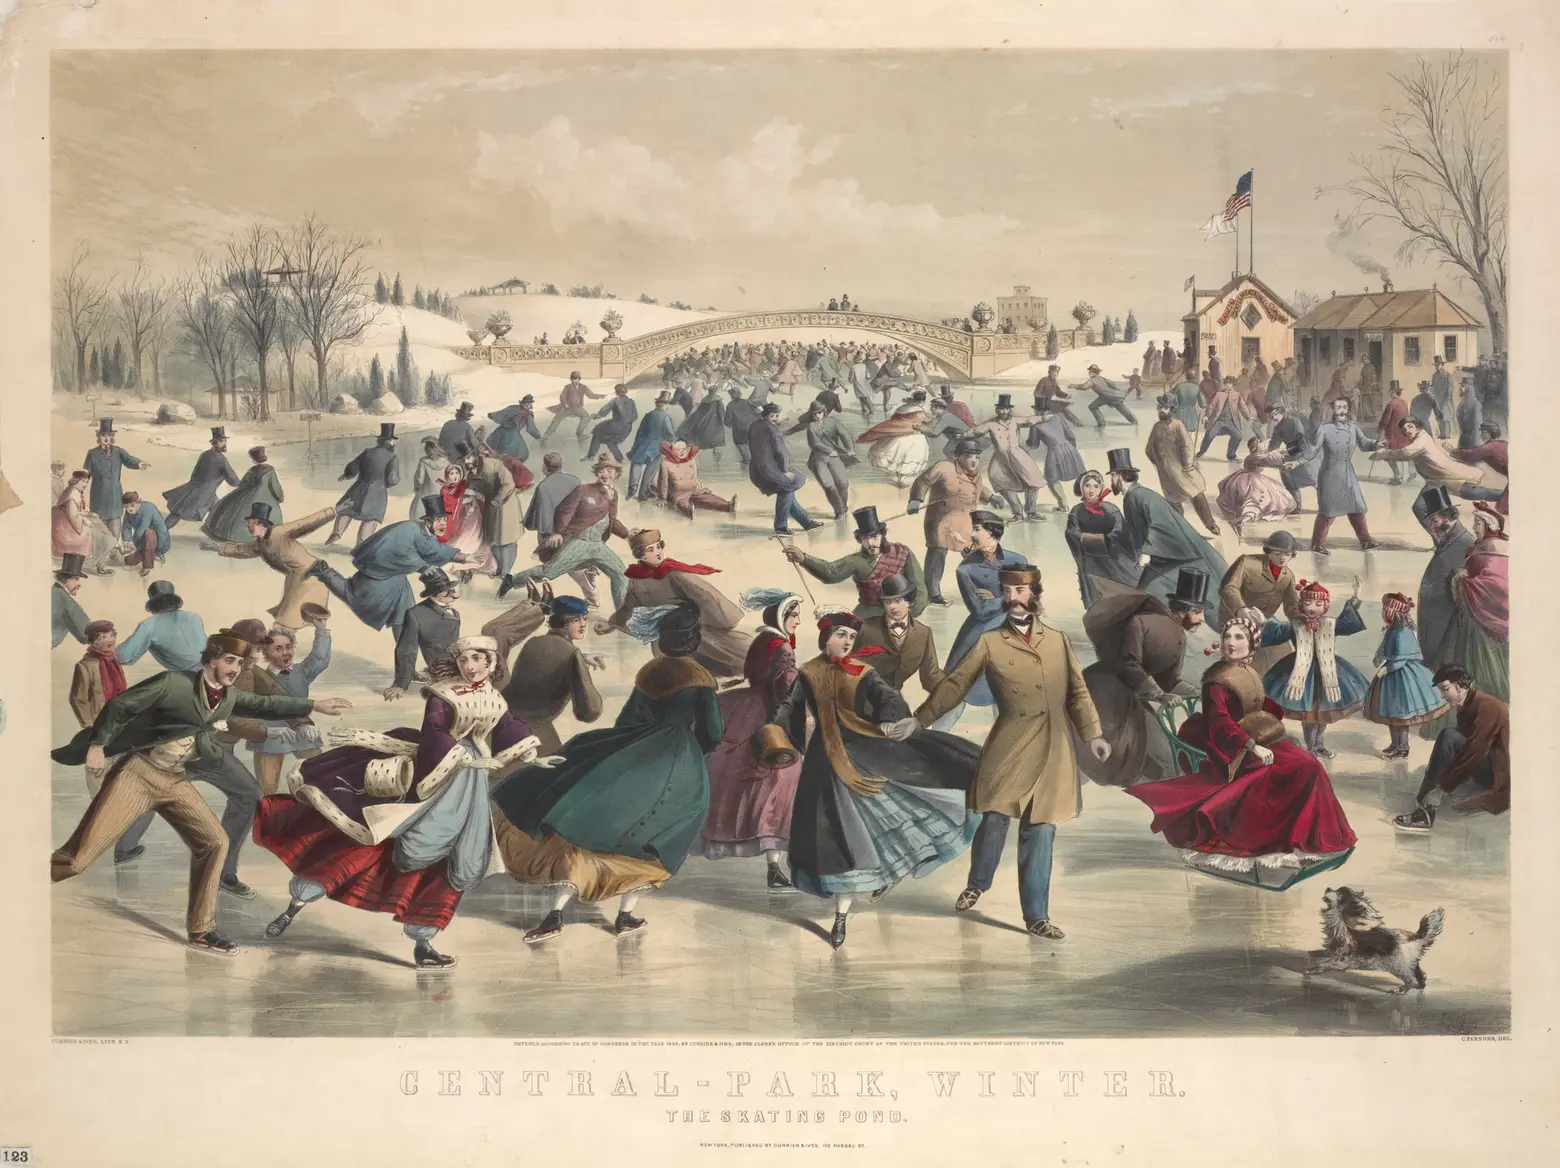 How New York keeps its cool: A history of ice skating in NYC